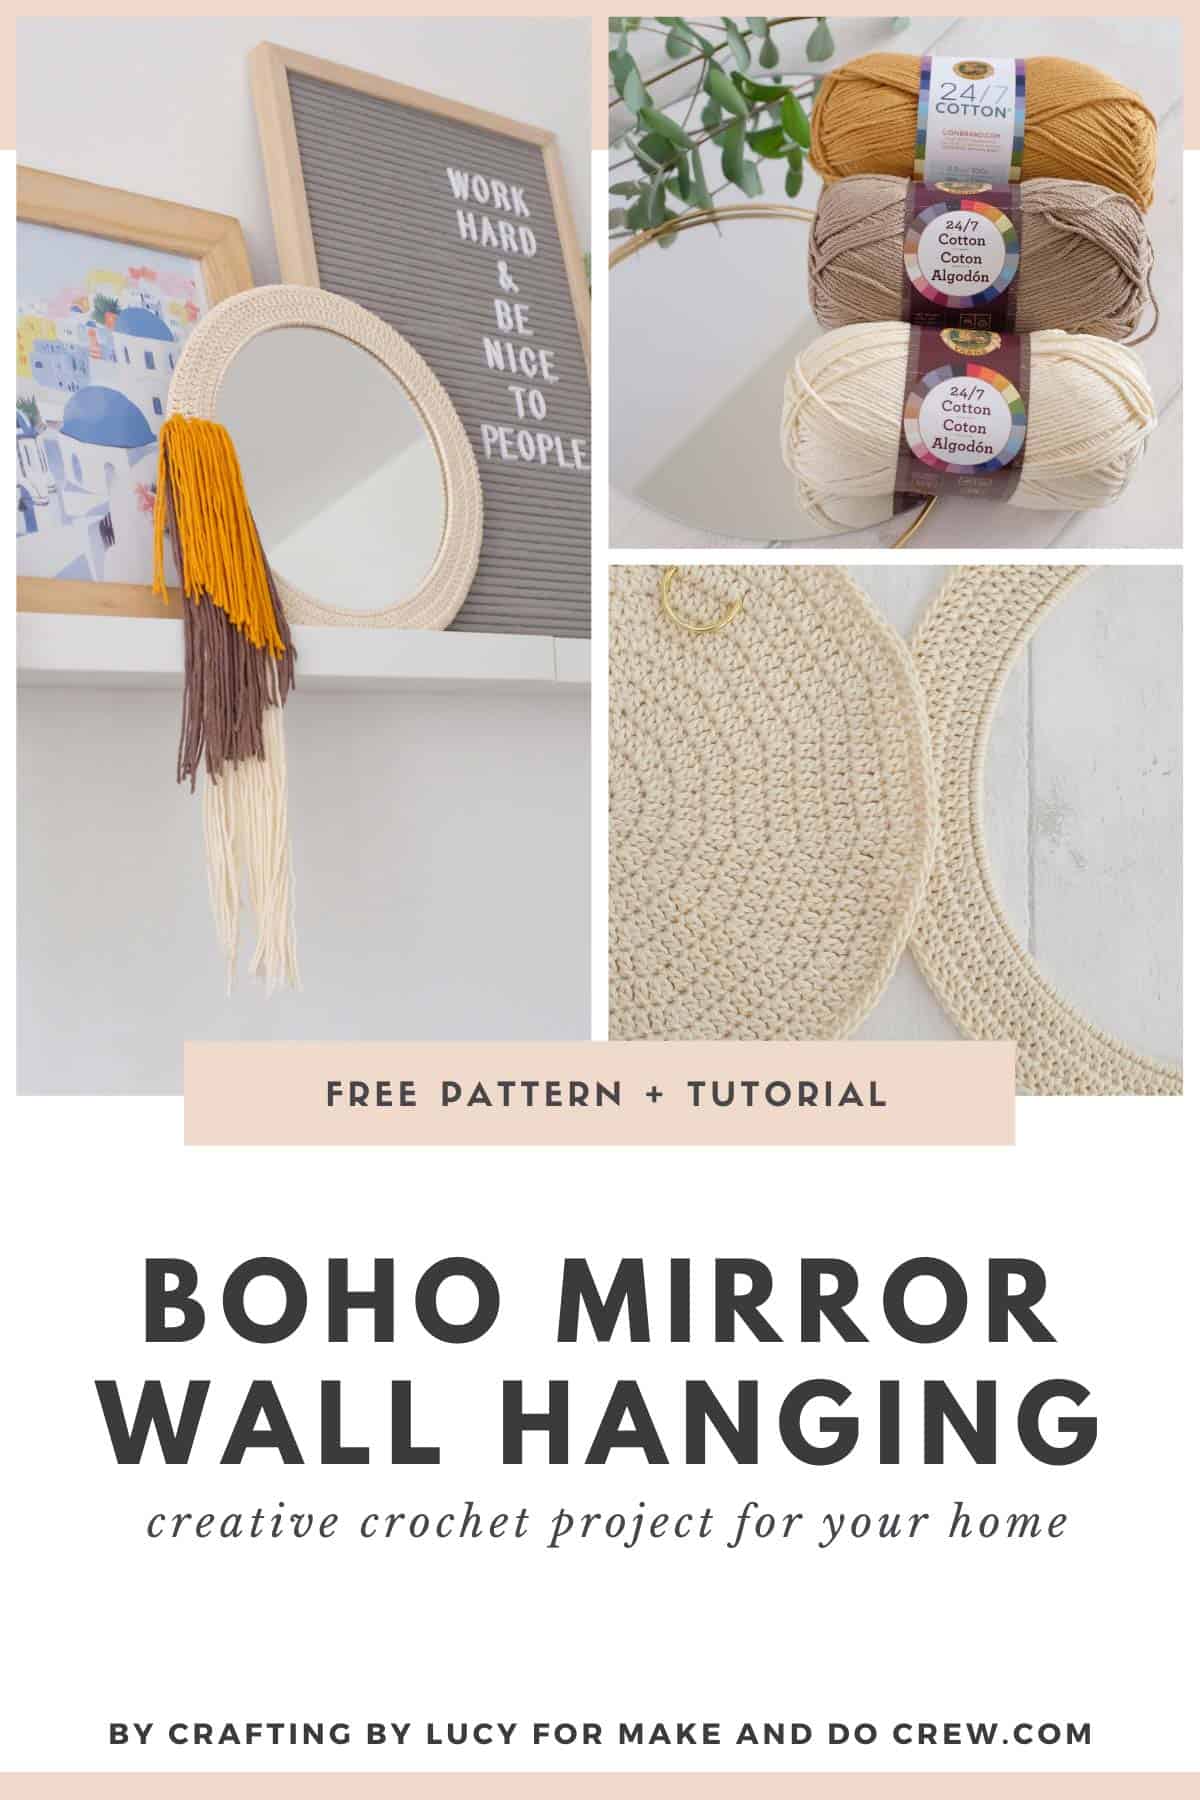 Crochet mirror with tassels made with Lion Brand 24/7 Cotton.